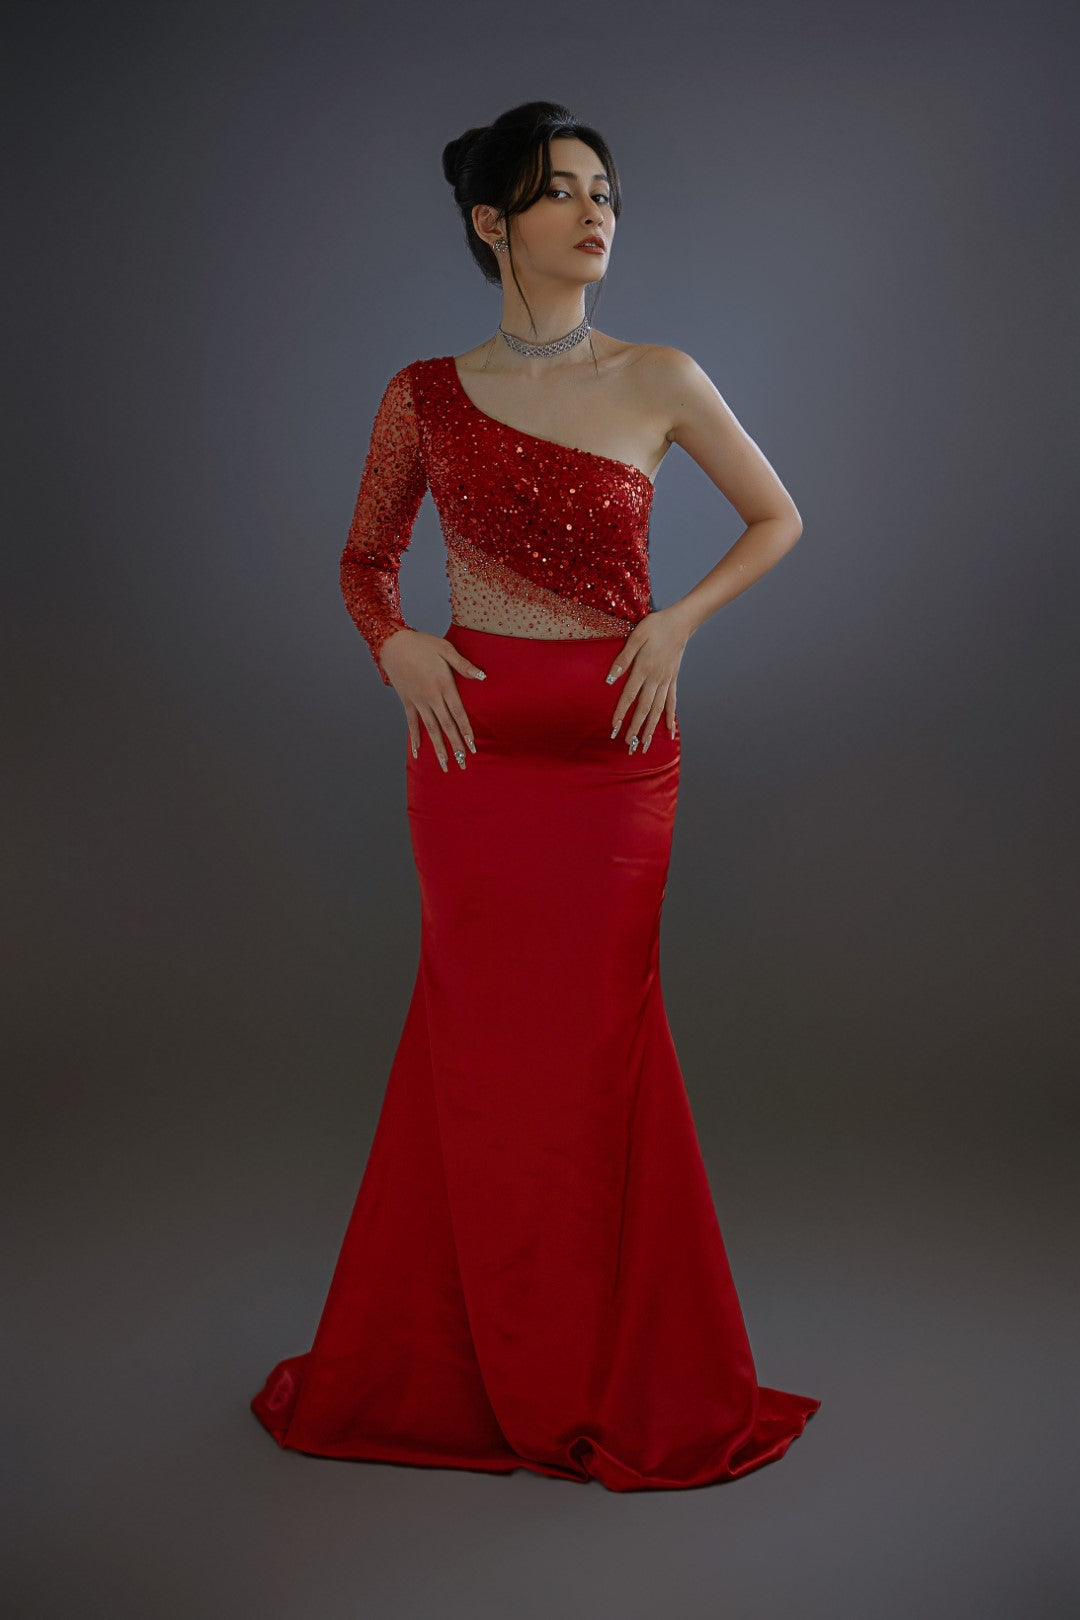 Lillie - Sultry Sophistication: Sexy and Chic Mermaid Prom Dress